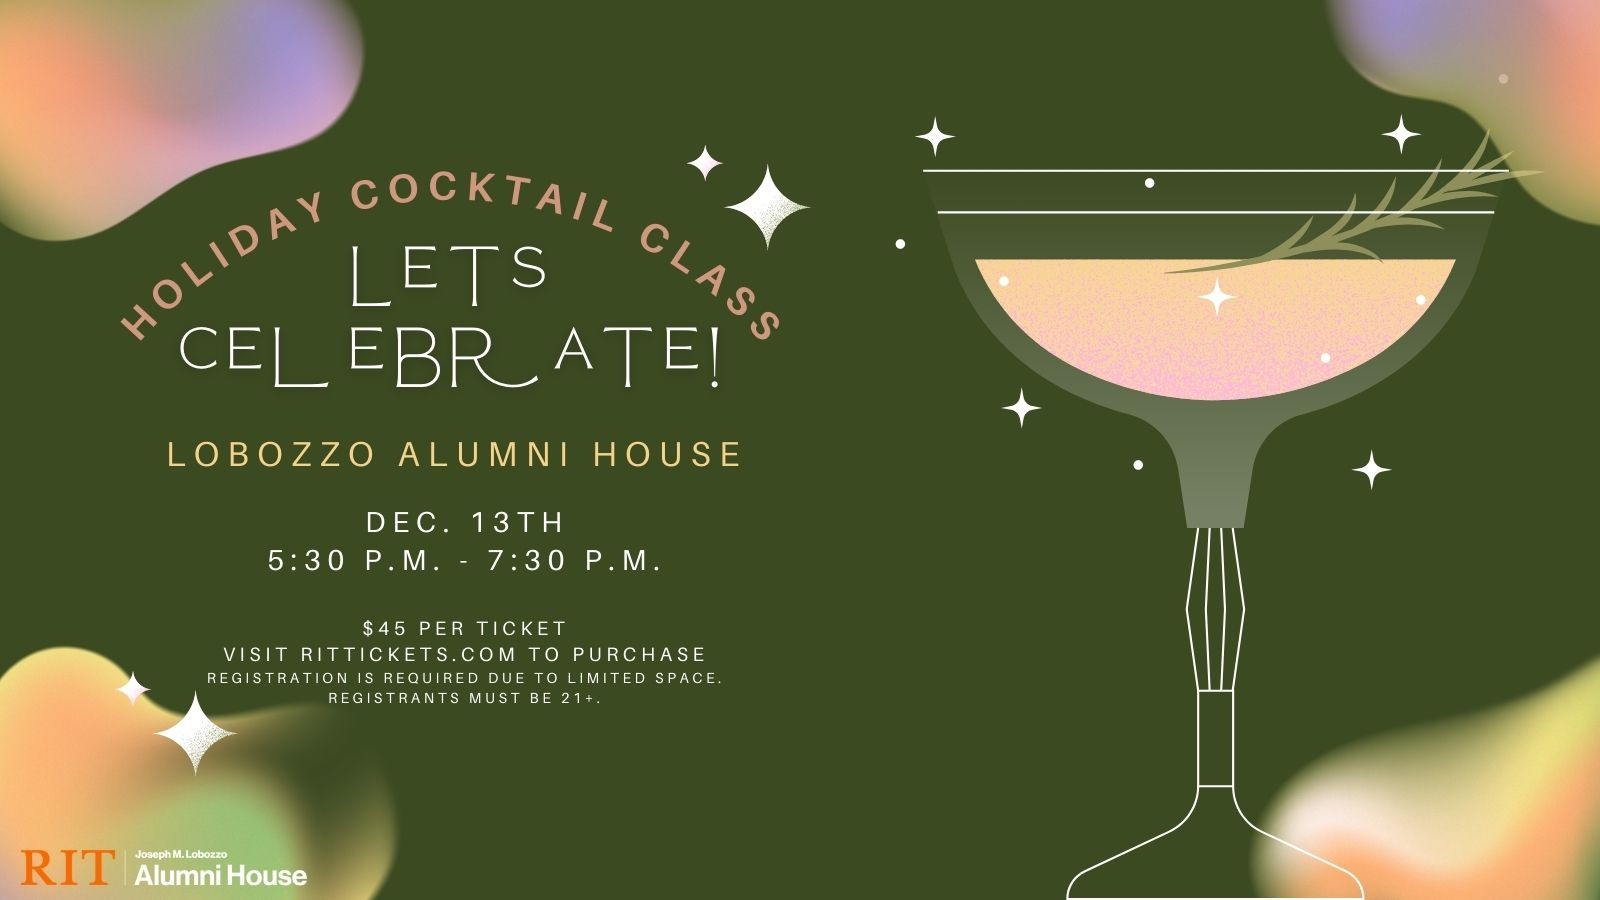 cocktail glass with event information